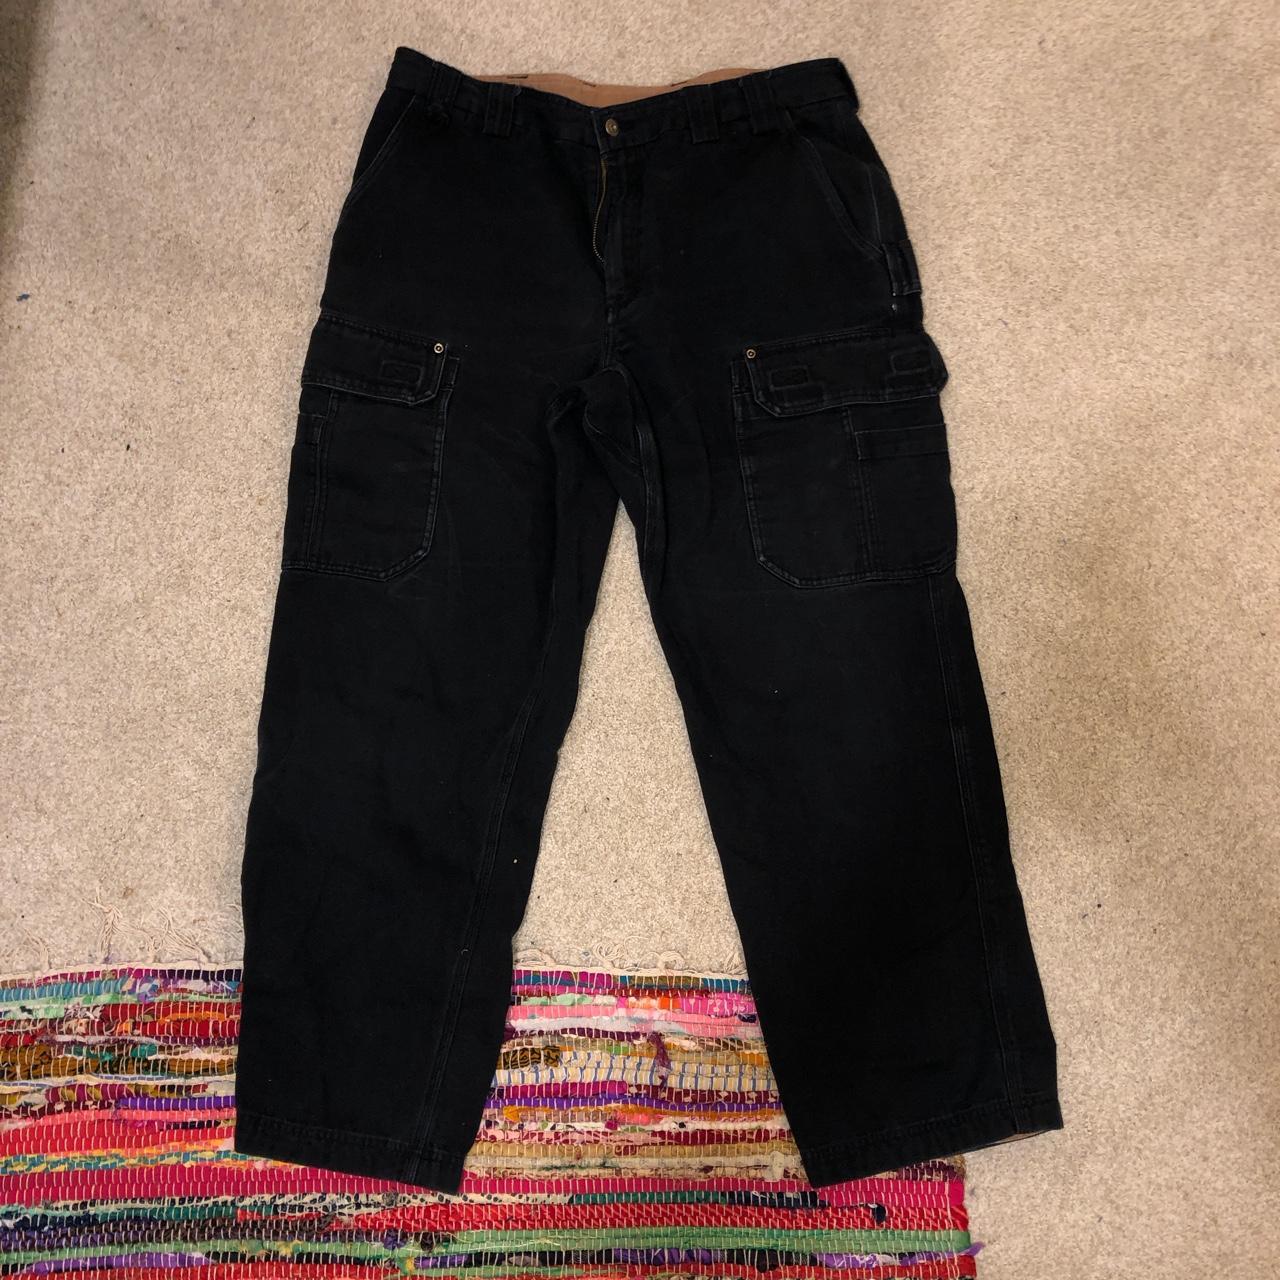 Duluth Trading Company Men's Black Jeans